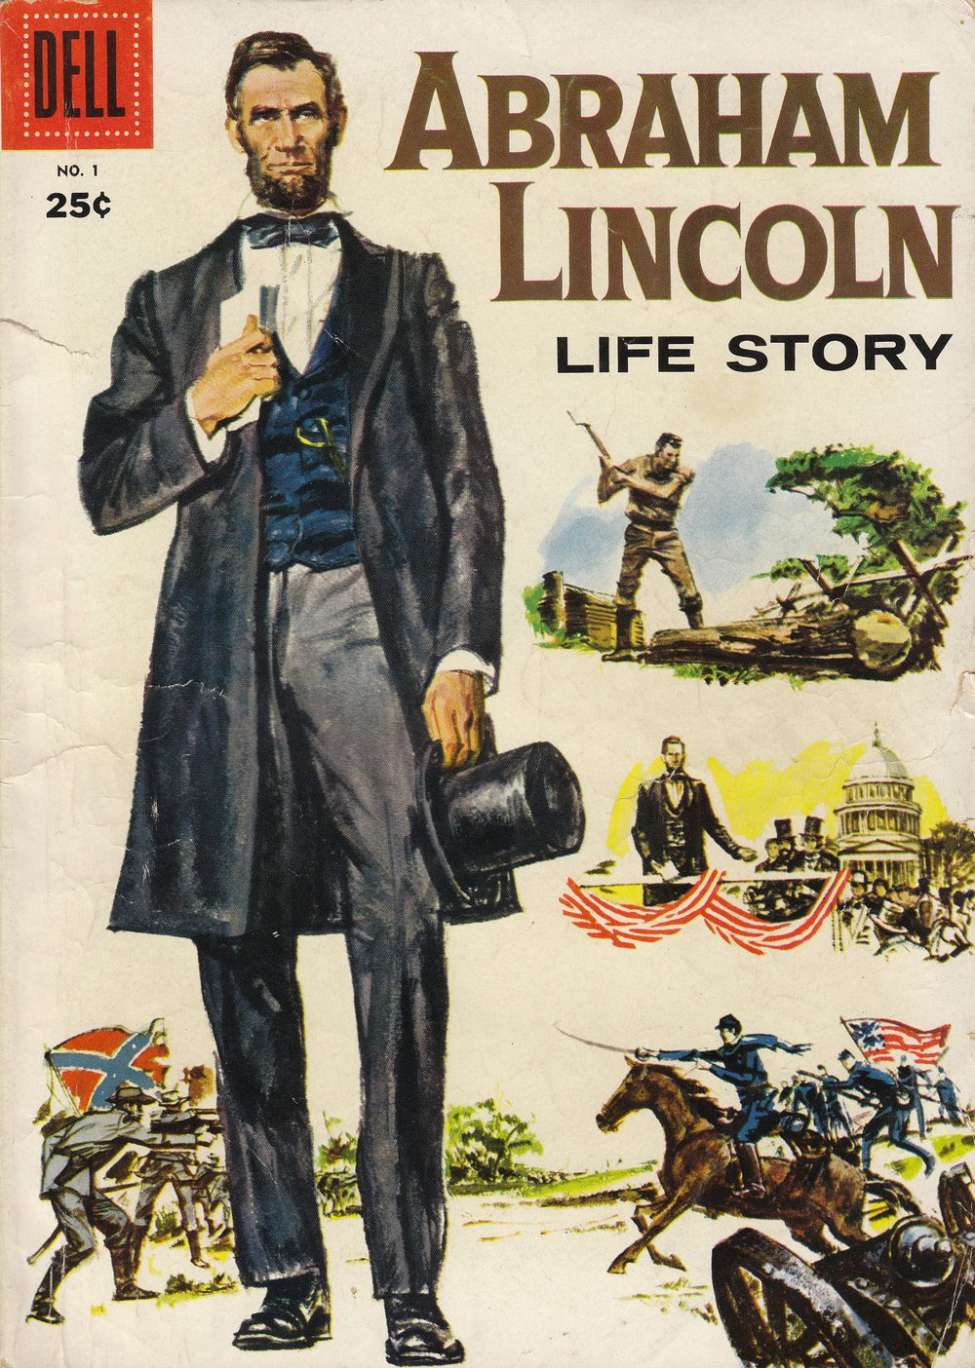 Book Cover For Abraham Lincoln Life Story